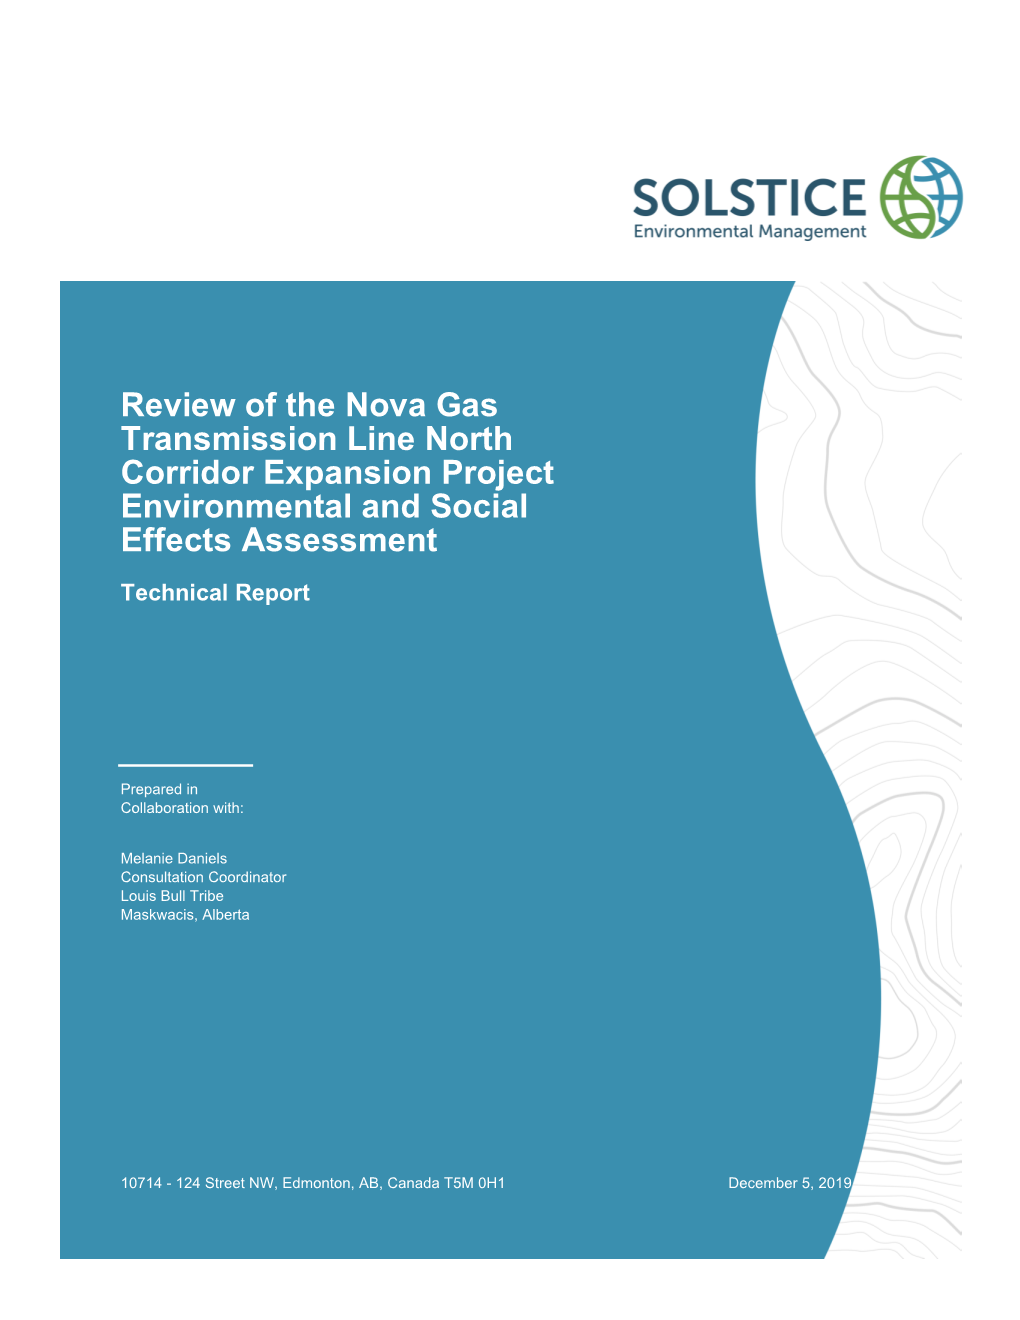 Review of the Nova Gas Transmission Line North Corridor Expansion Project Environmental and Social Effects Assessment Technical Report